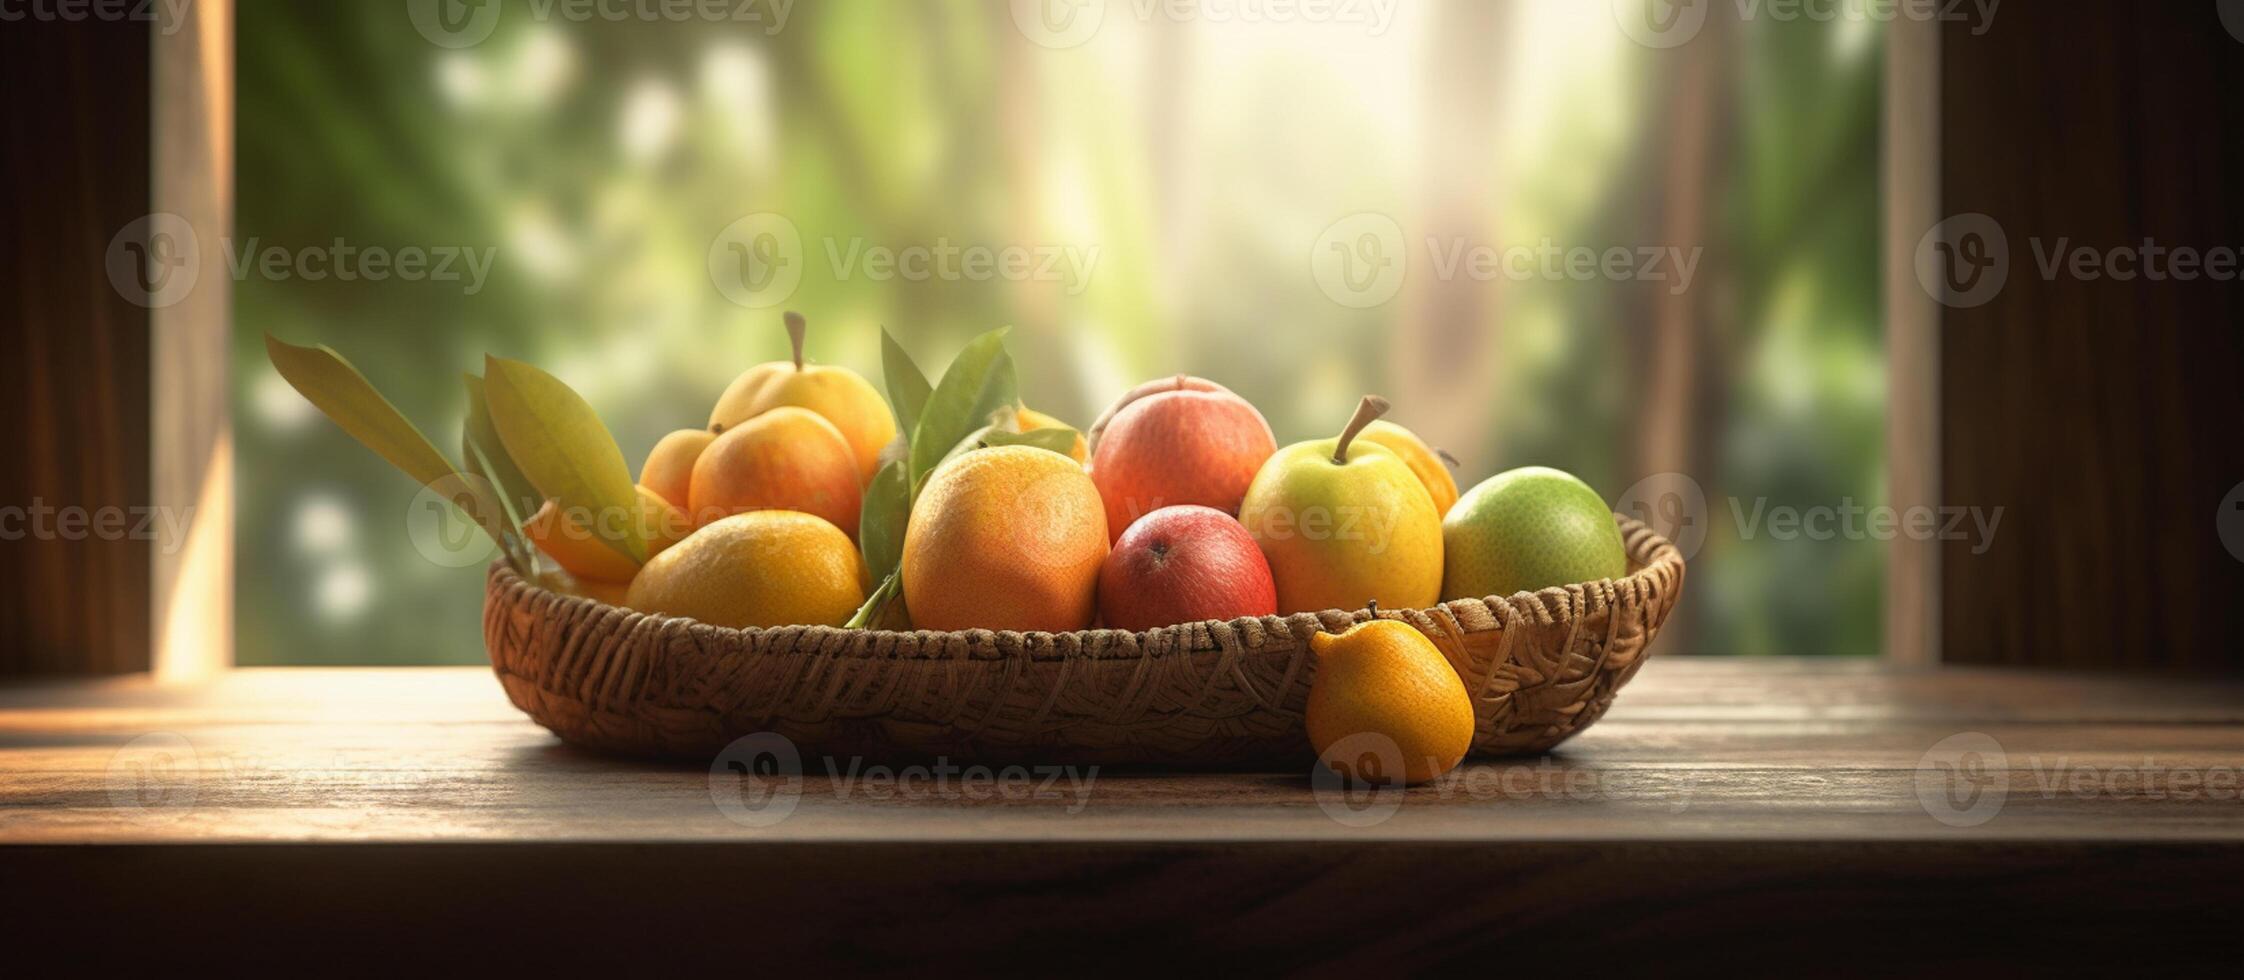 Fresh fruit in a basket on a wooden table in the sun on a blurred plantation background. photo